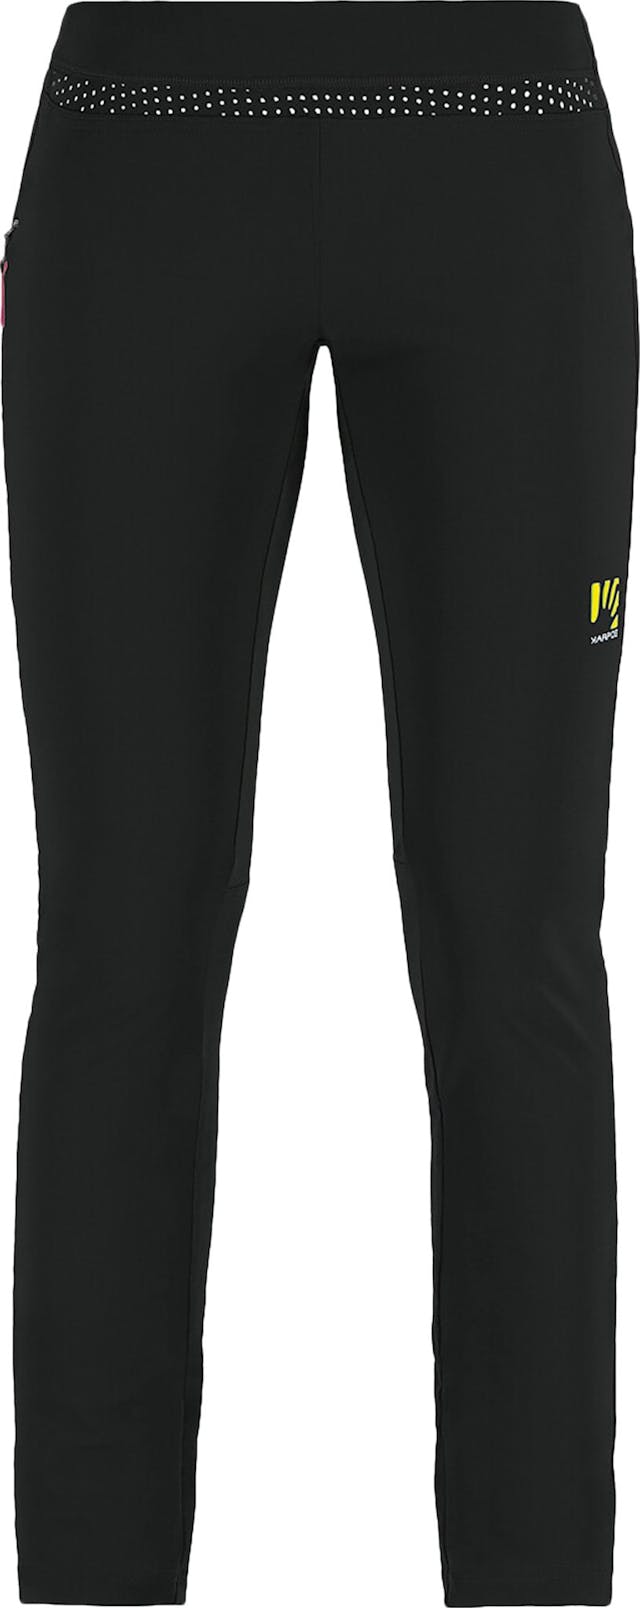 Product image for Easy Pant - Women's